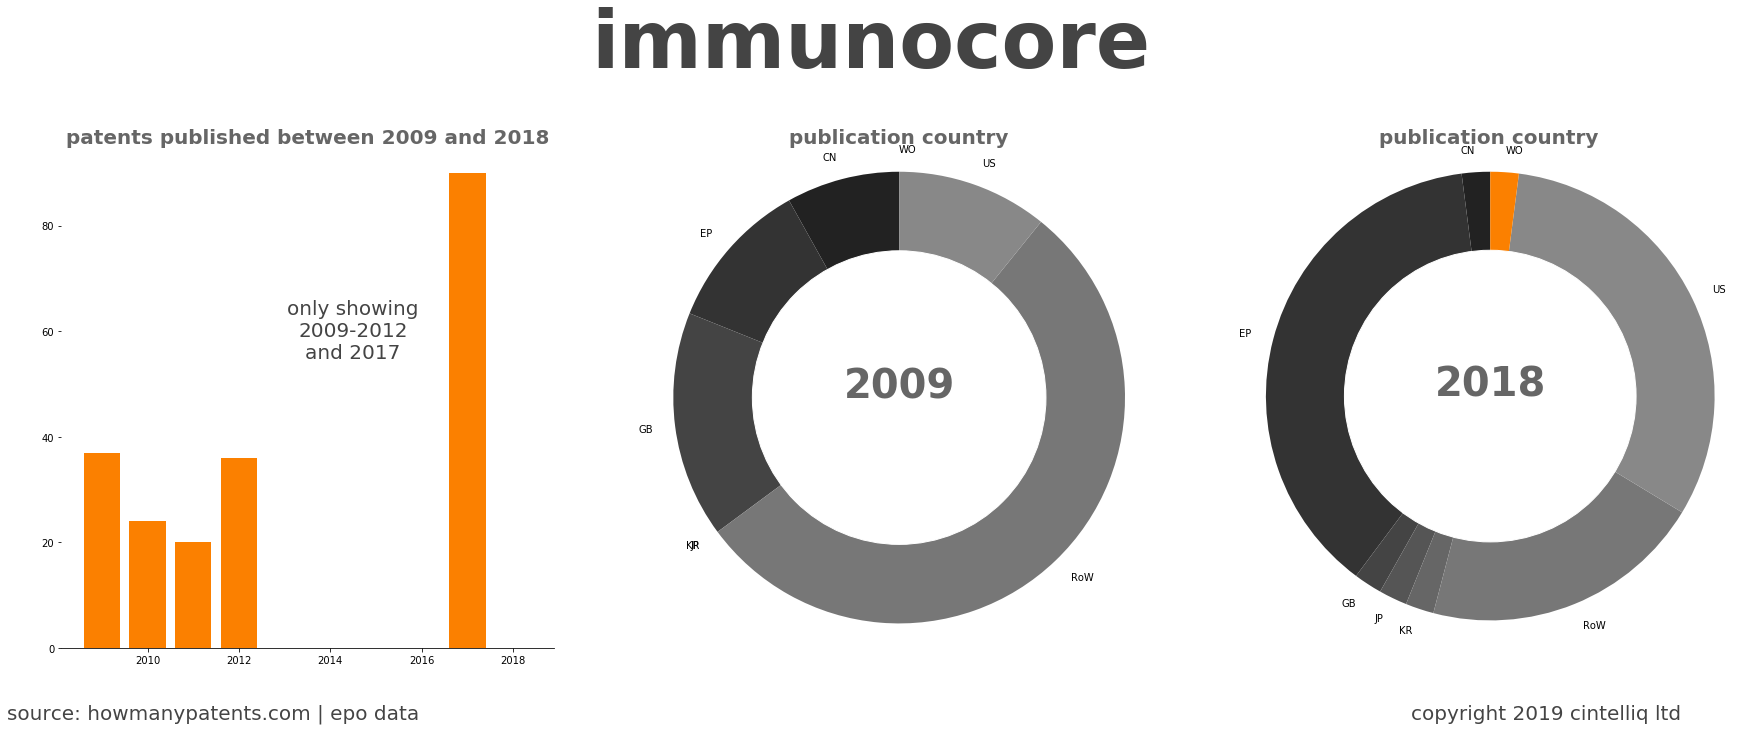 summary of patents for Immunocore